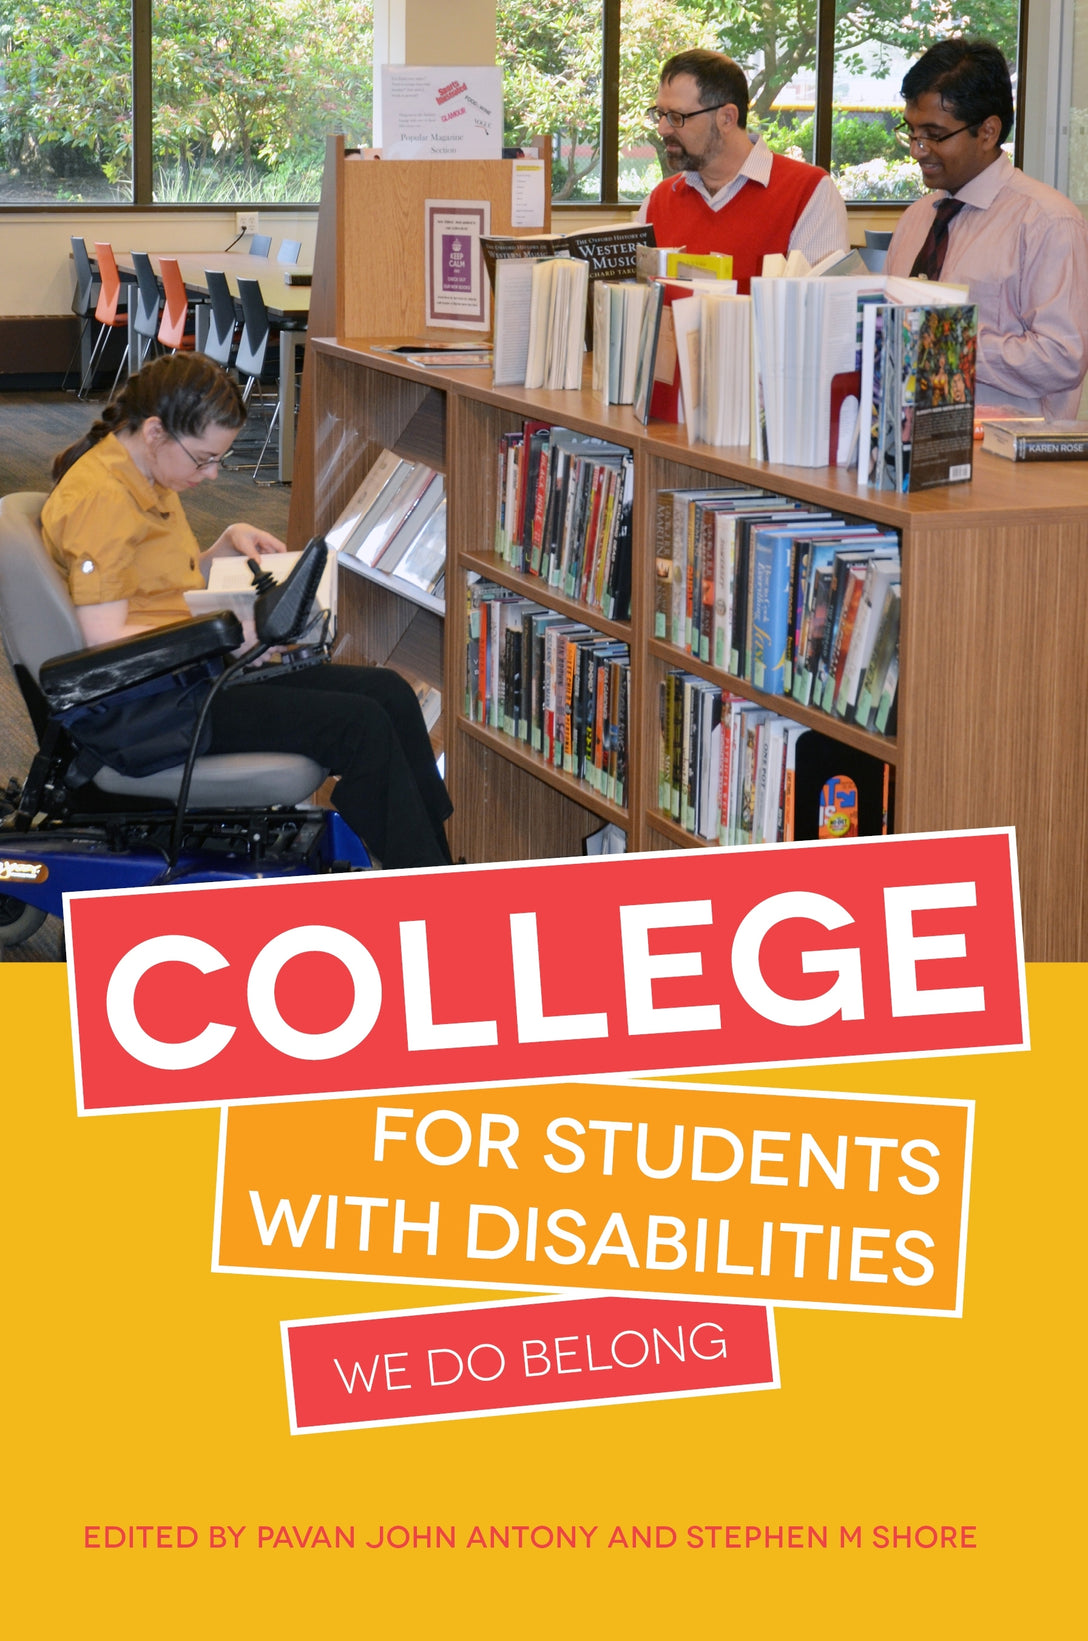 College for Students with Disabilities by No Author Listed, Temple Grandin, Stephen M. Shore, Pavan John Antony